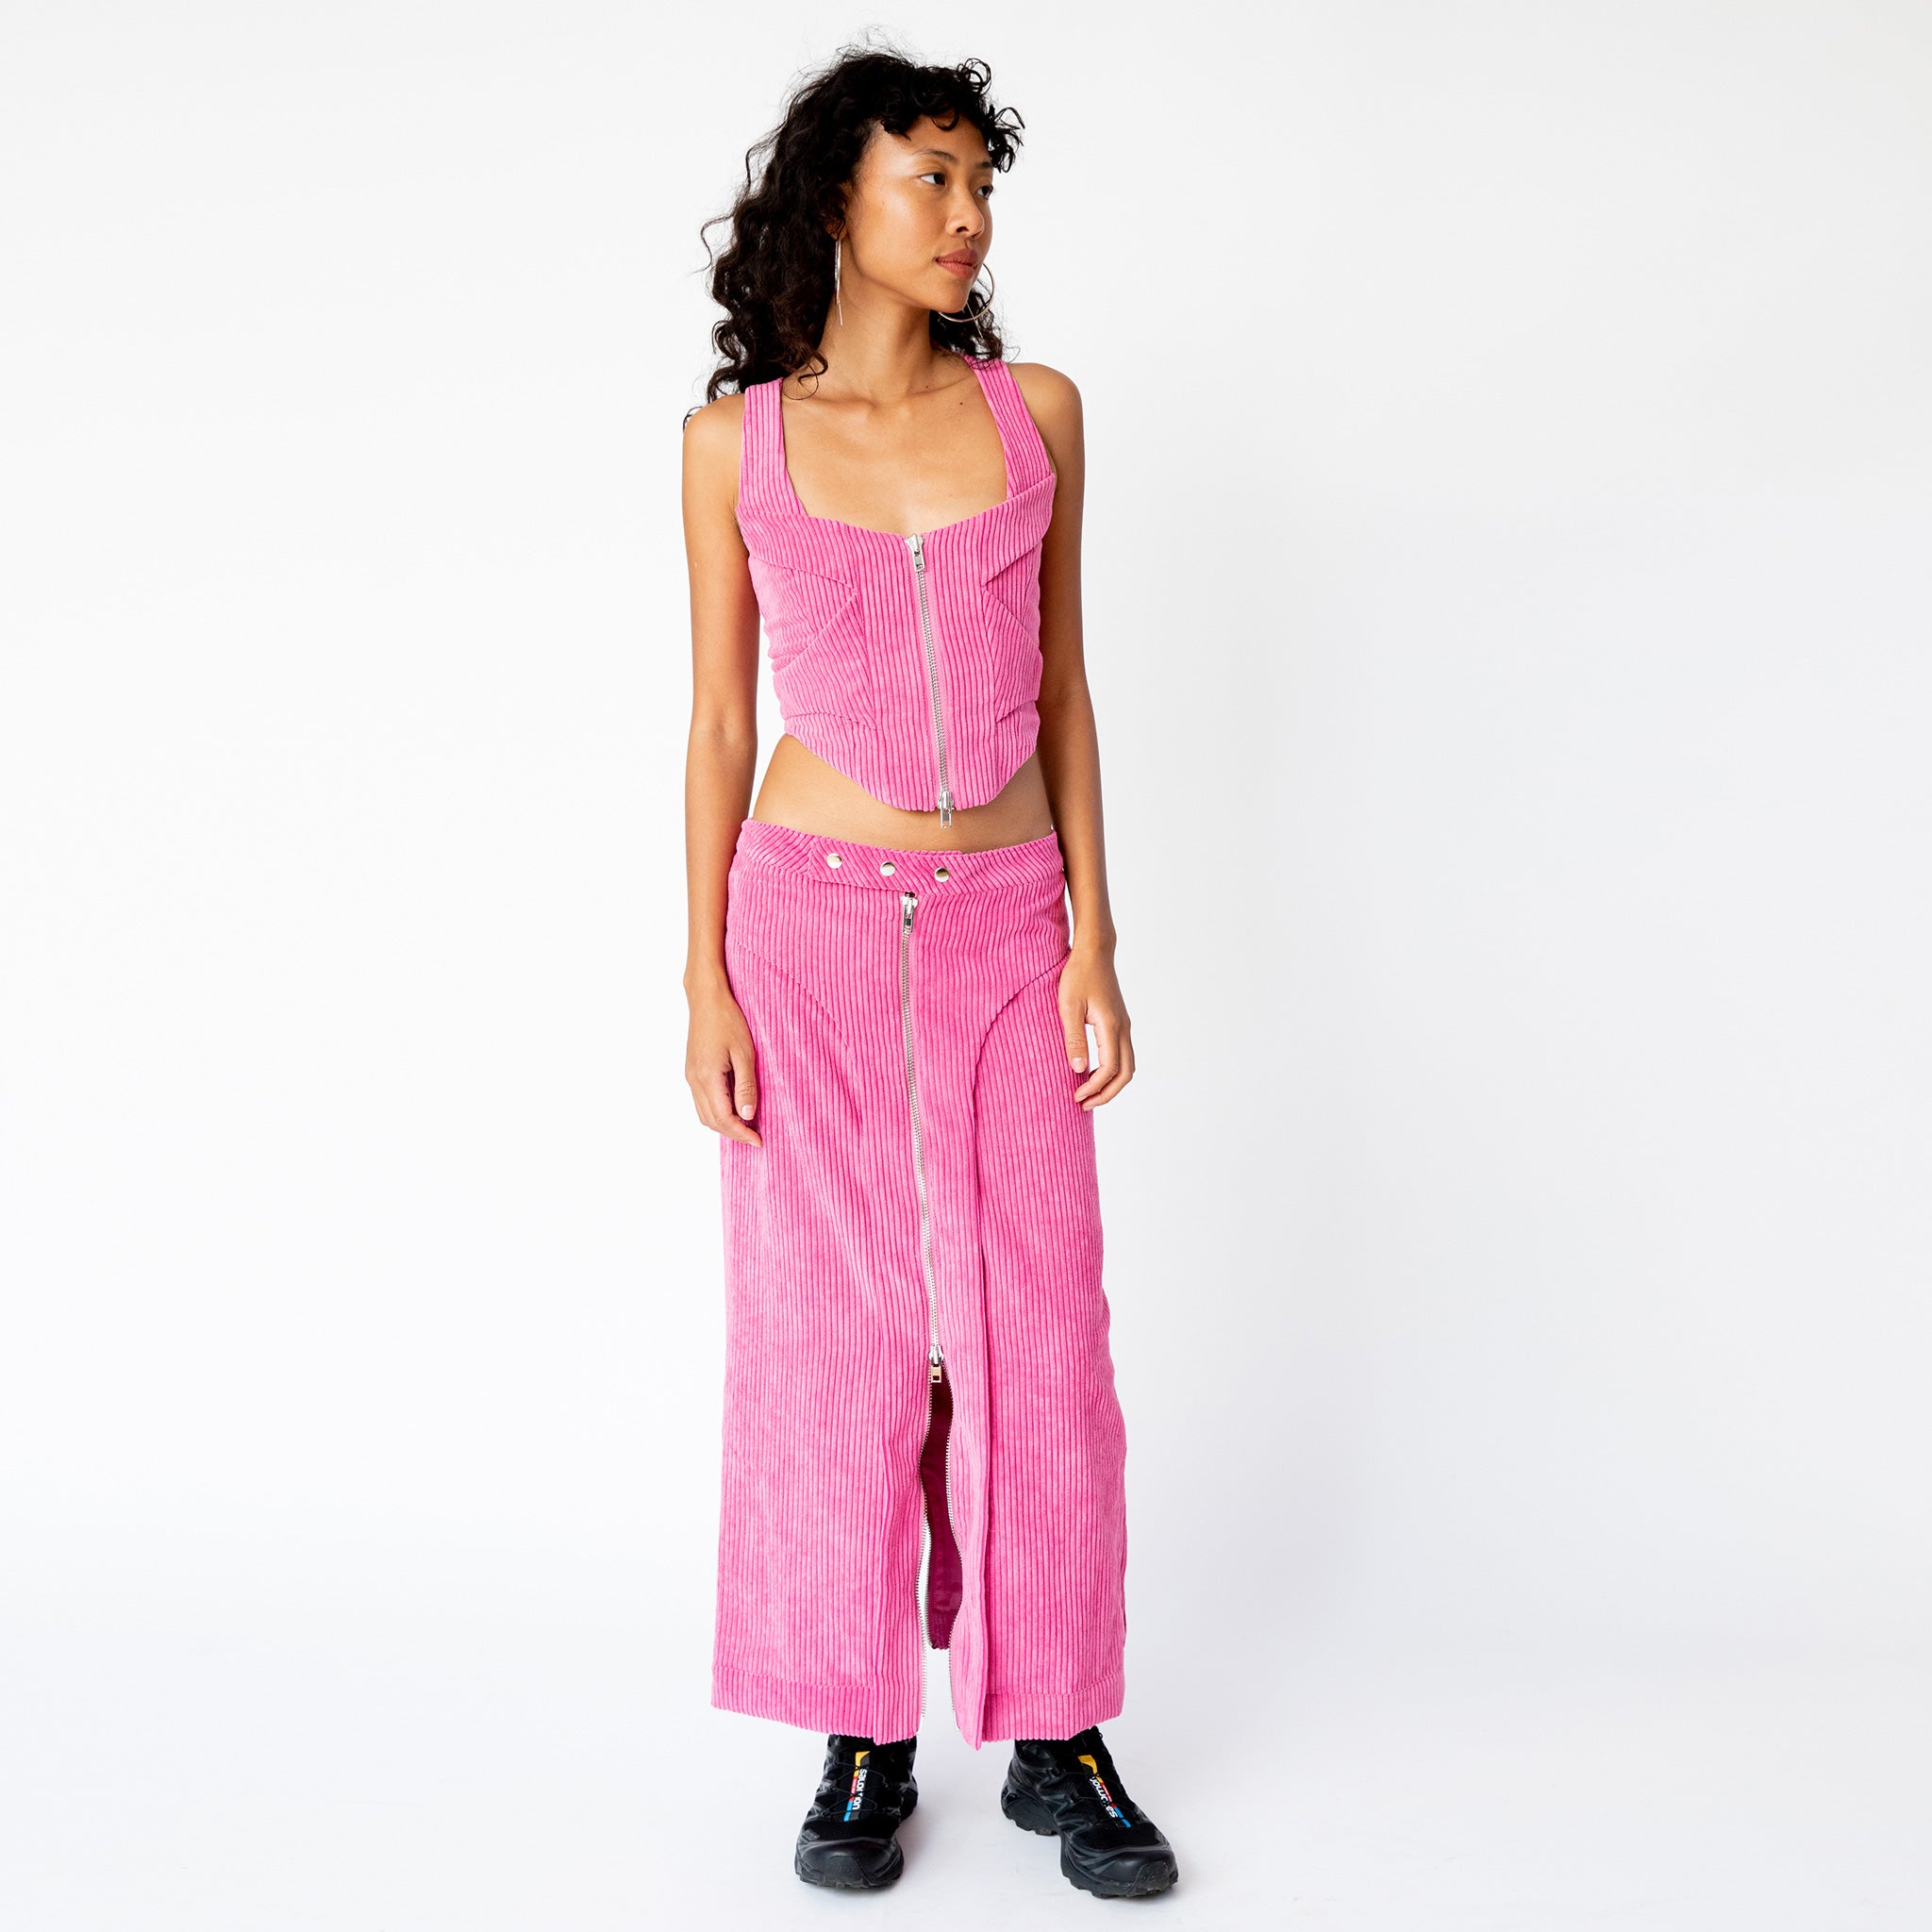 A model looks to the side while wearing the pink corduroy Cord Bustier by Eckhaus Latta, with silver front zipper and wide shoulder straps, paired here with the matching full length corduroy zip skirt.